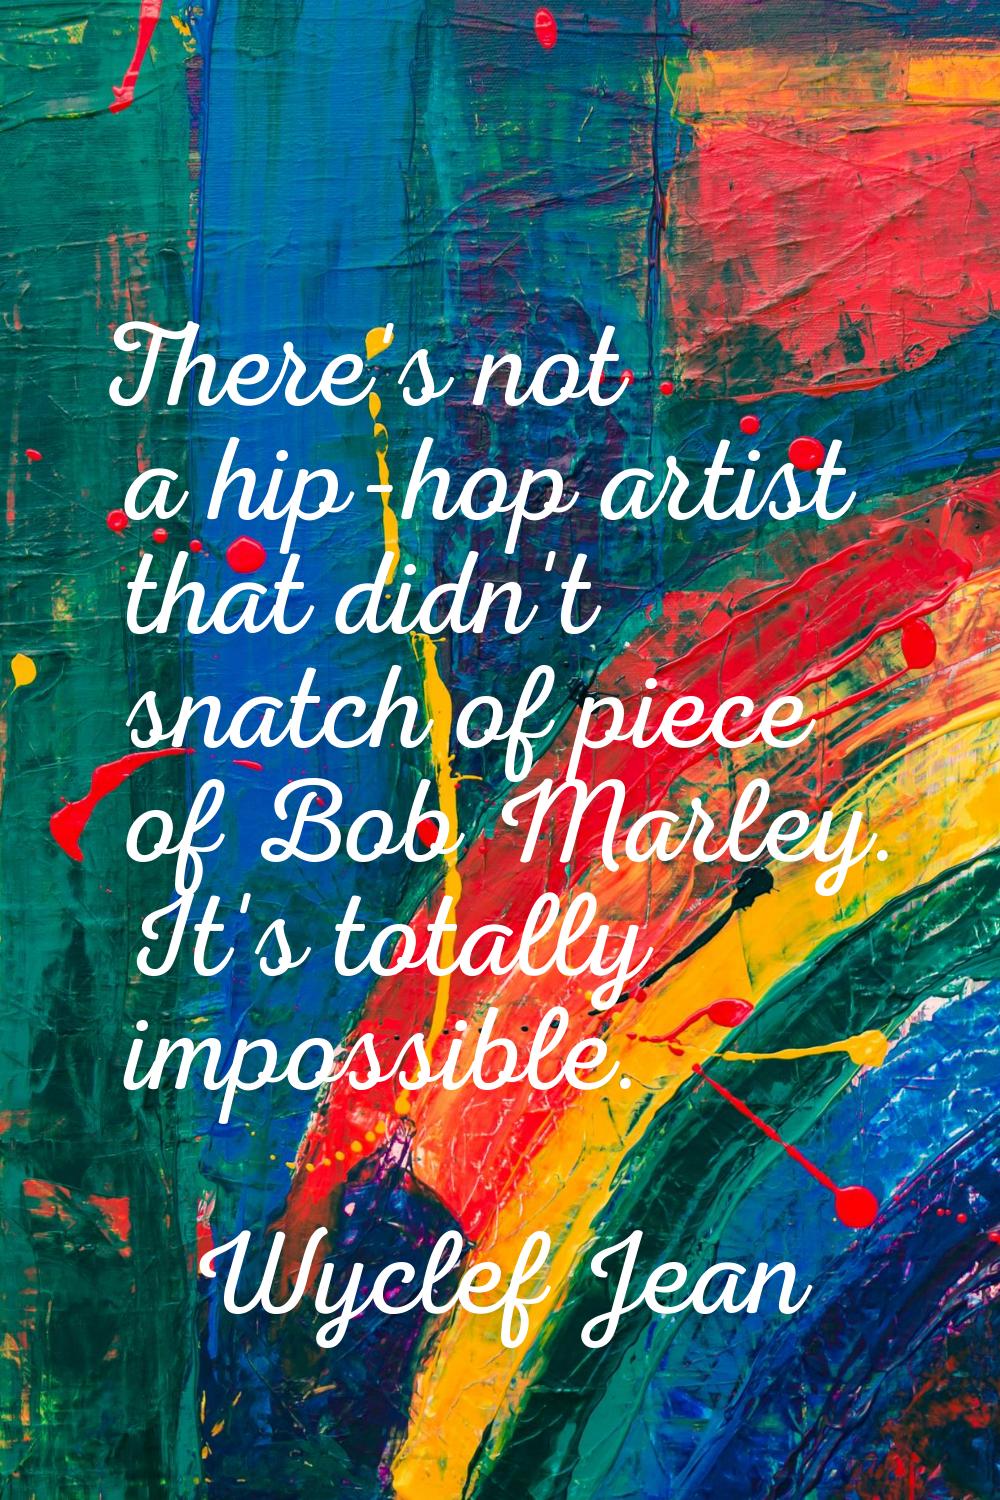 There's not a hip-hop artist that didn't snatch of piece of Bob Marley. It's totally impossible.